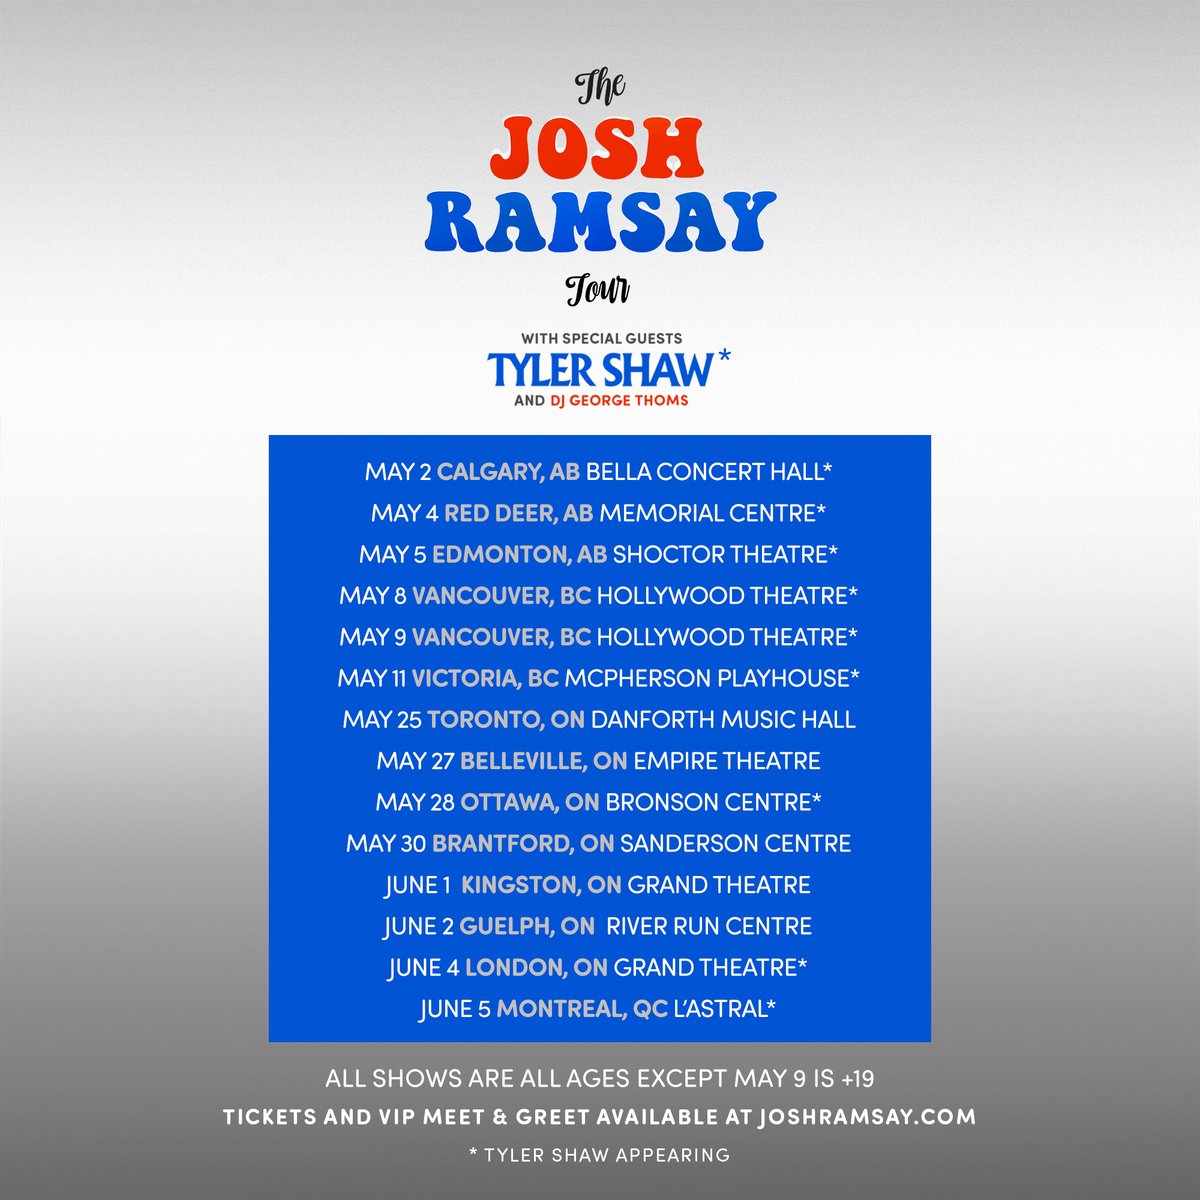 There's still time to get your tickets for #TheJoshRamsayTour! 🤩

🎟 Tickets and VIP Meet & Greet on sale now joshramsay.com  

#TheJoshRamsayShow #JoshRamsay #LiveMusic #LiveMusicCanada #604Records